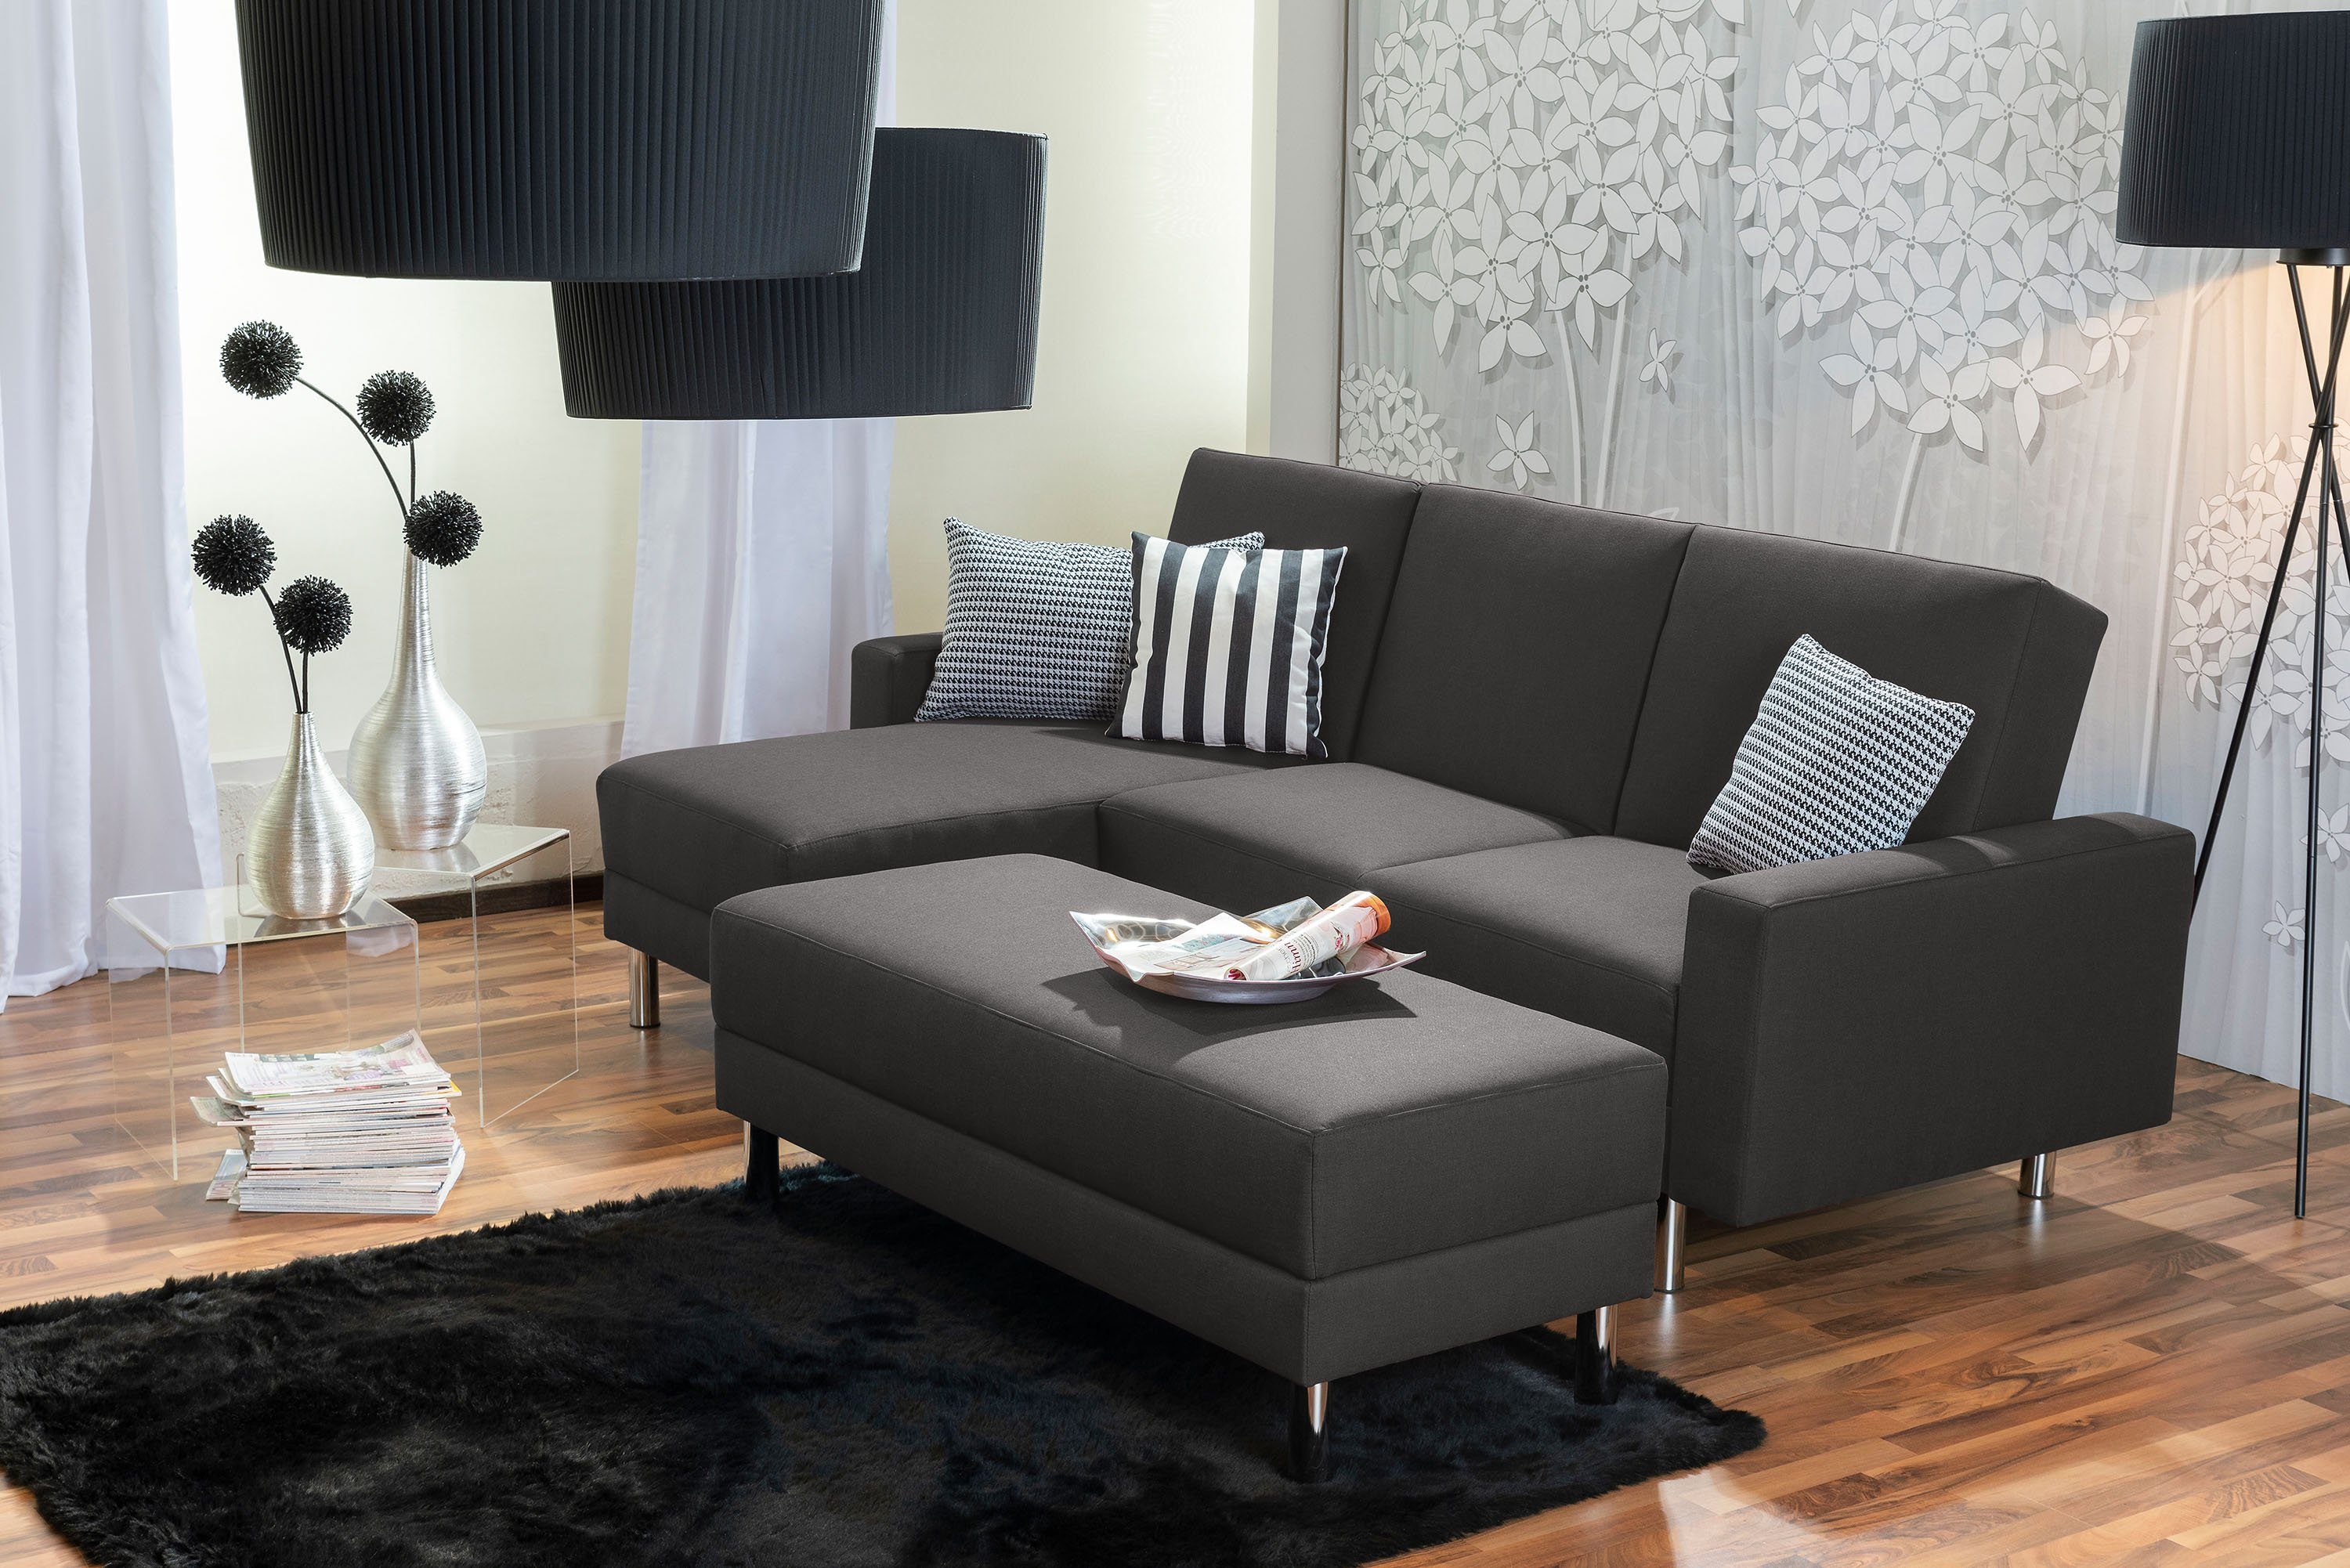 Max Winzer® Loungesofa Just Fashion Funktionssofa Flachgewebe anthrazit, 1 Stück, Made in Germany